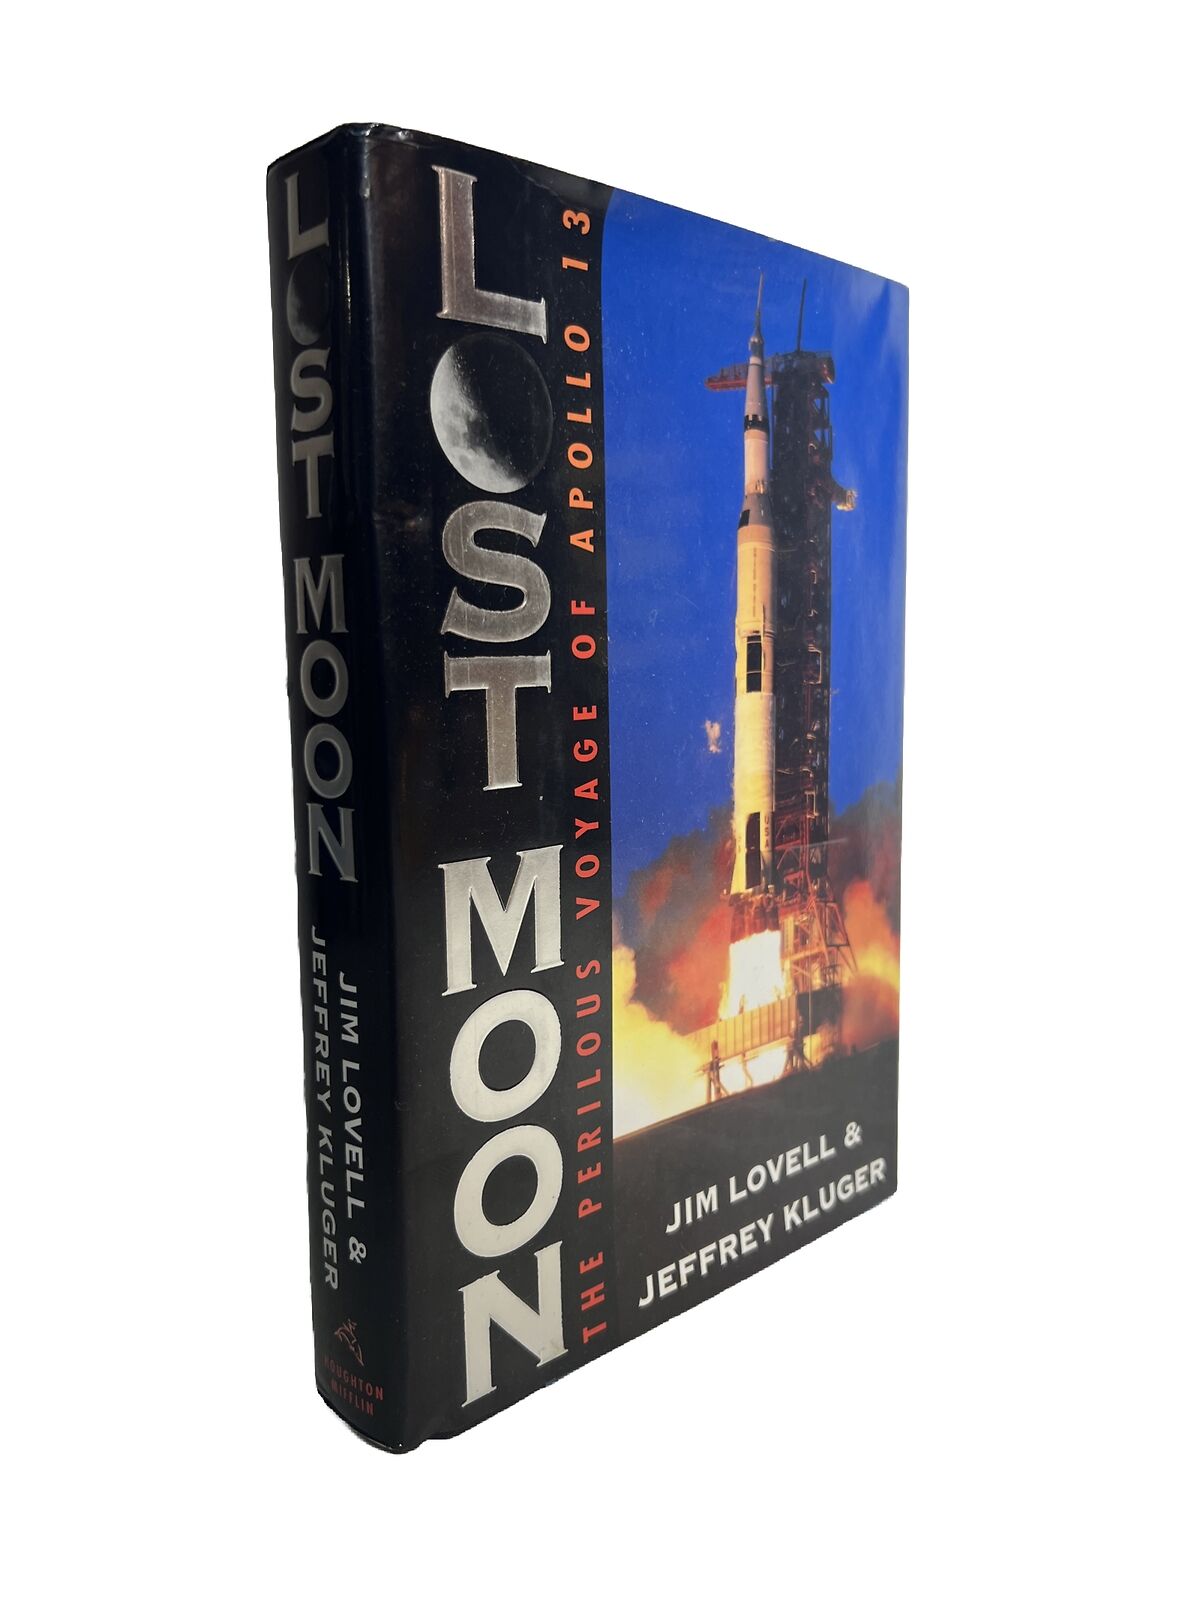 Lost Moon The Story of Apollo 13 Signed by Astronaut Jim Lovell